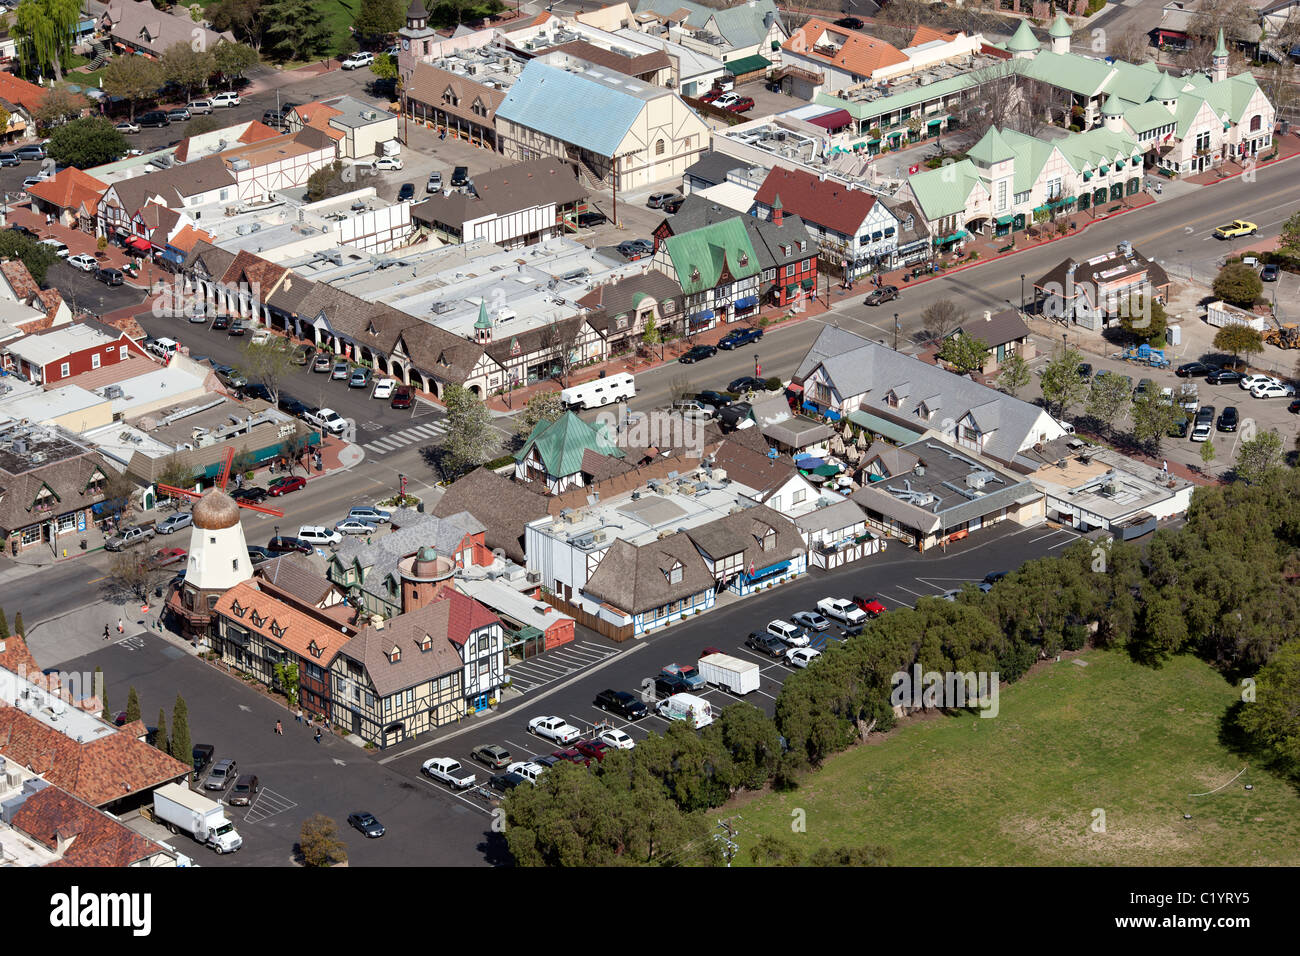 AERIAL VIEW. Town with Danish architecture founded by Danish settlers. Solvang, Santa Ynez Valley, Santa Barbara County, California, USA. Stock Photo